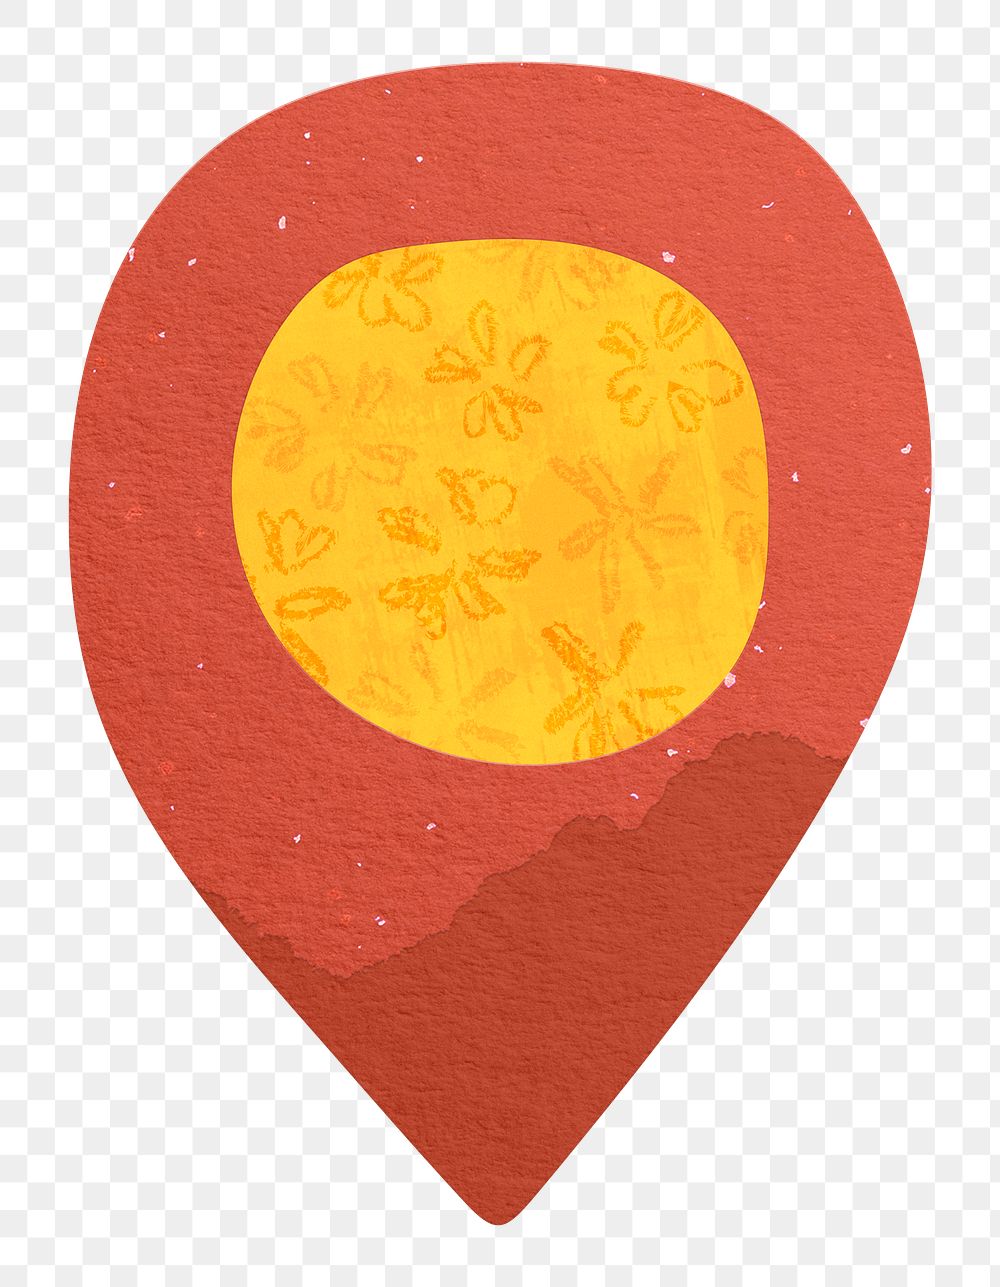 Location pin png cute paper cut icon, transparent background